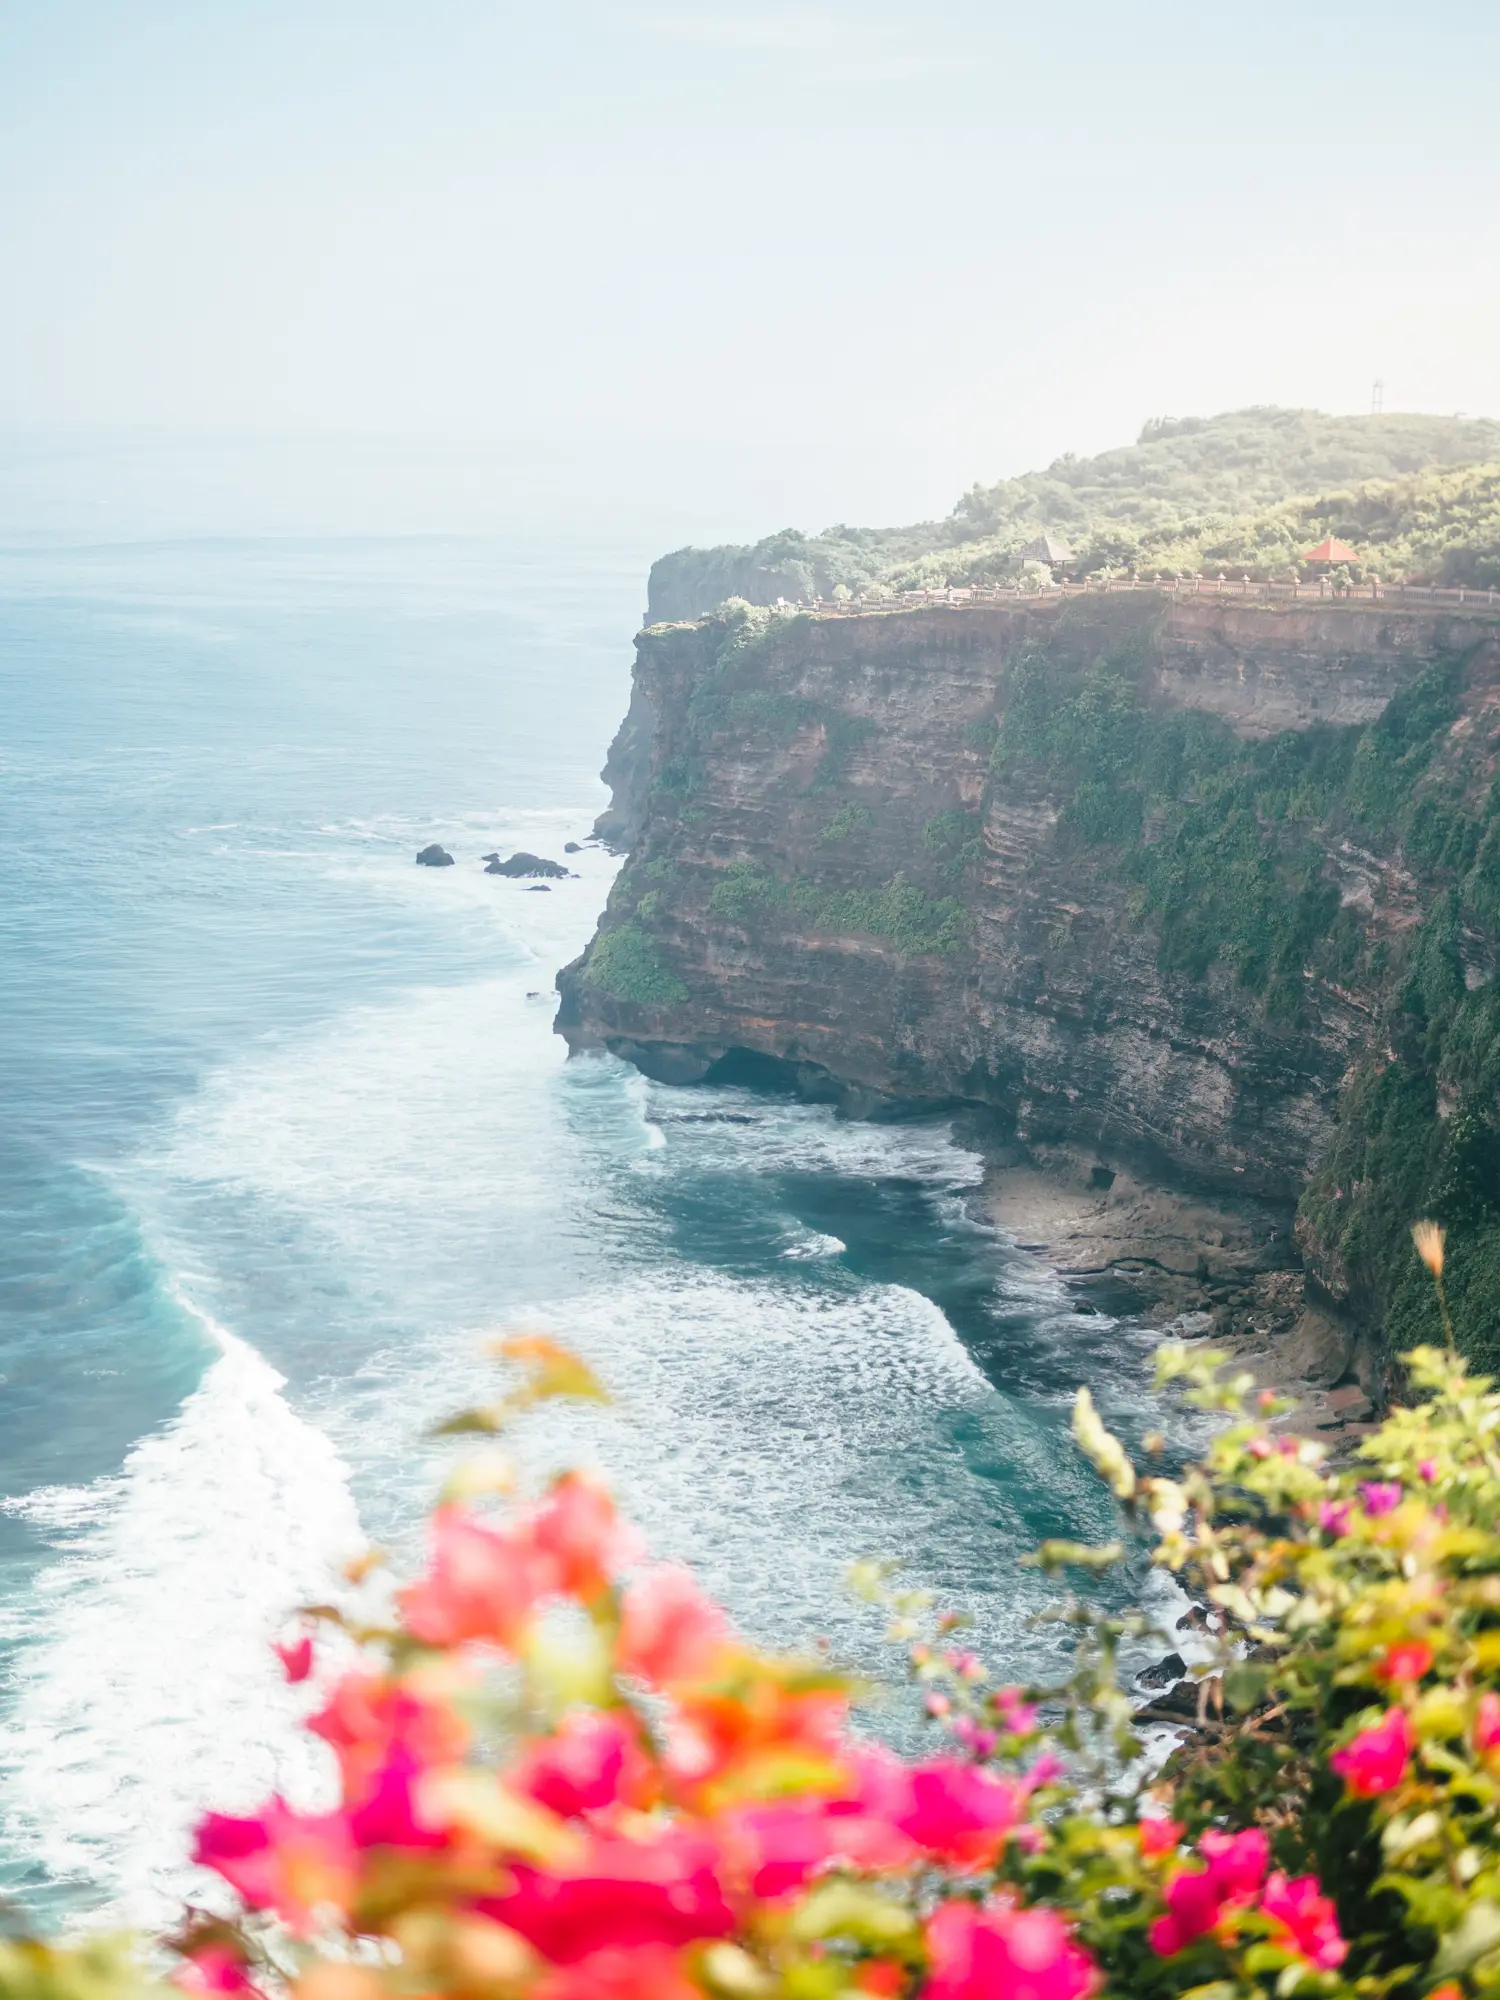 View from Uluwatu Temple in Bali over the ocean and surrounding cliffs with red flowers in the foreground.